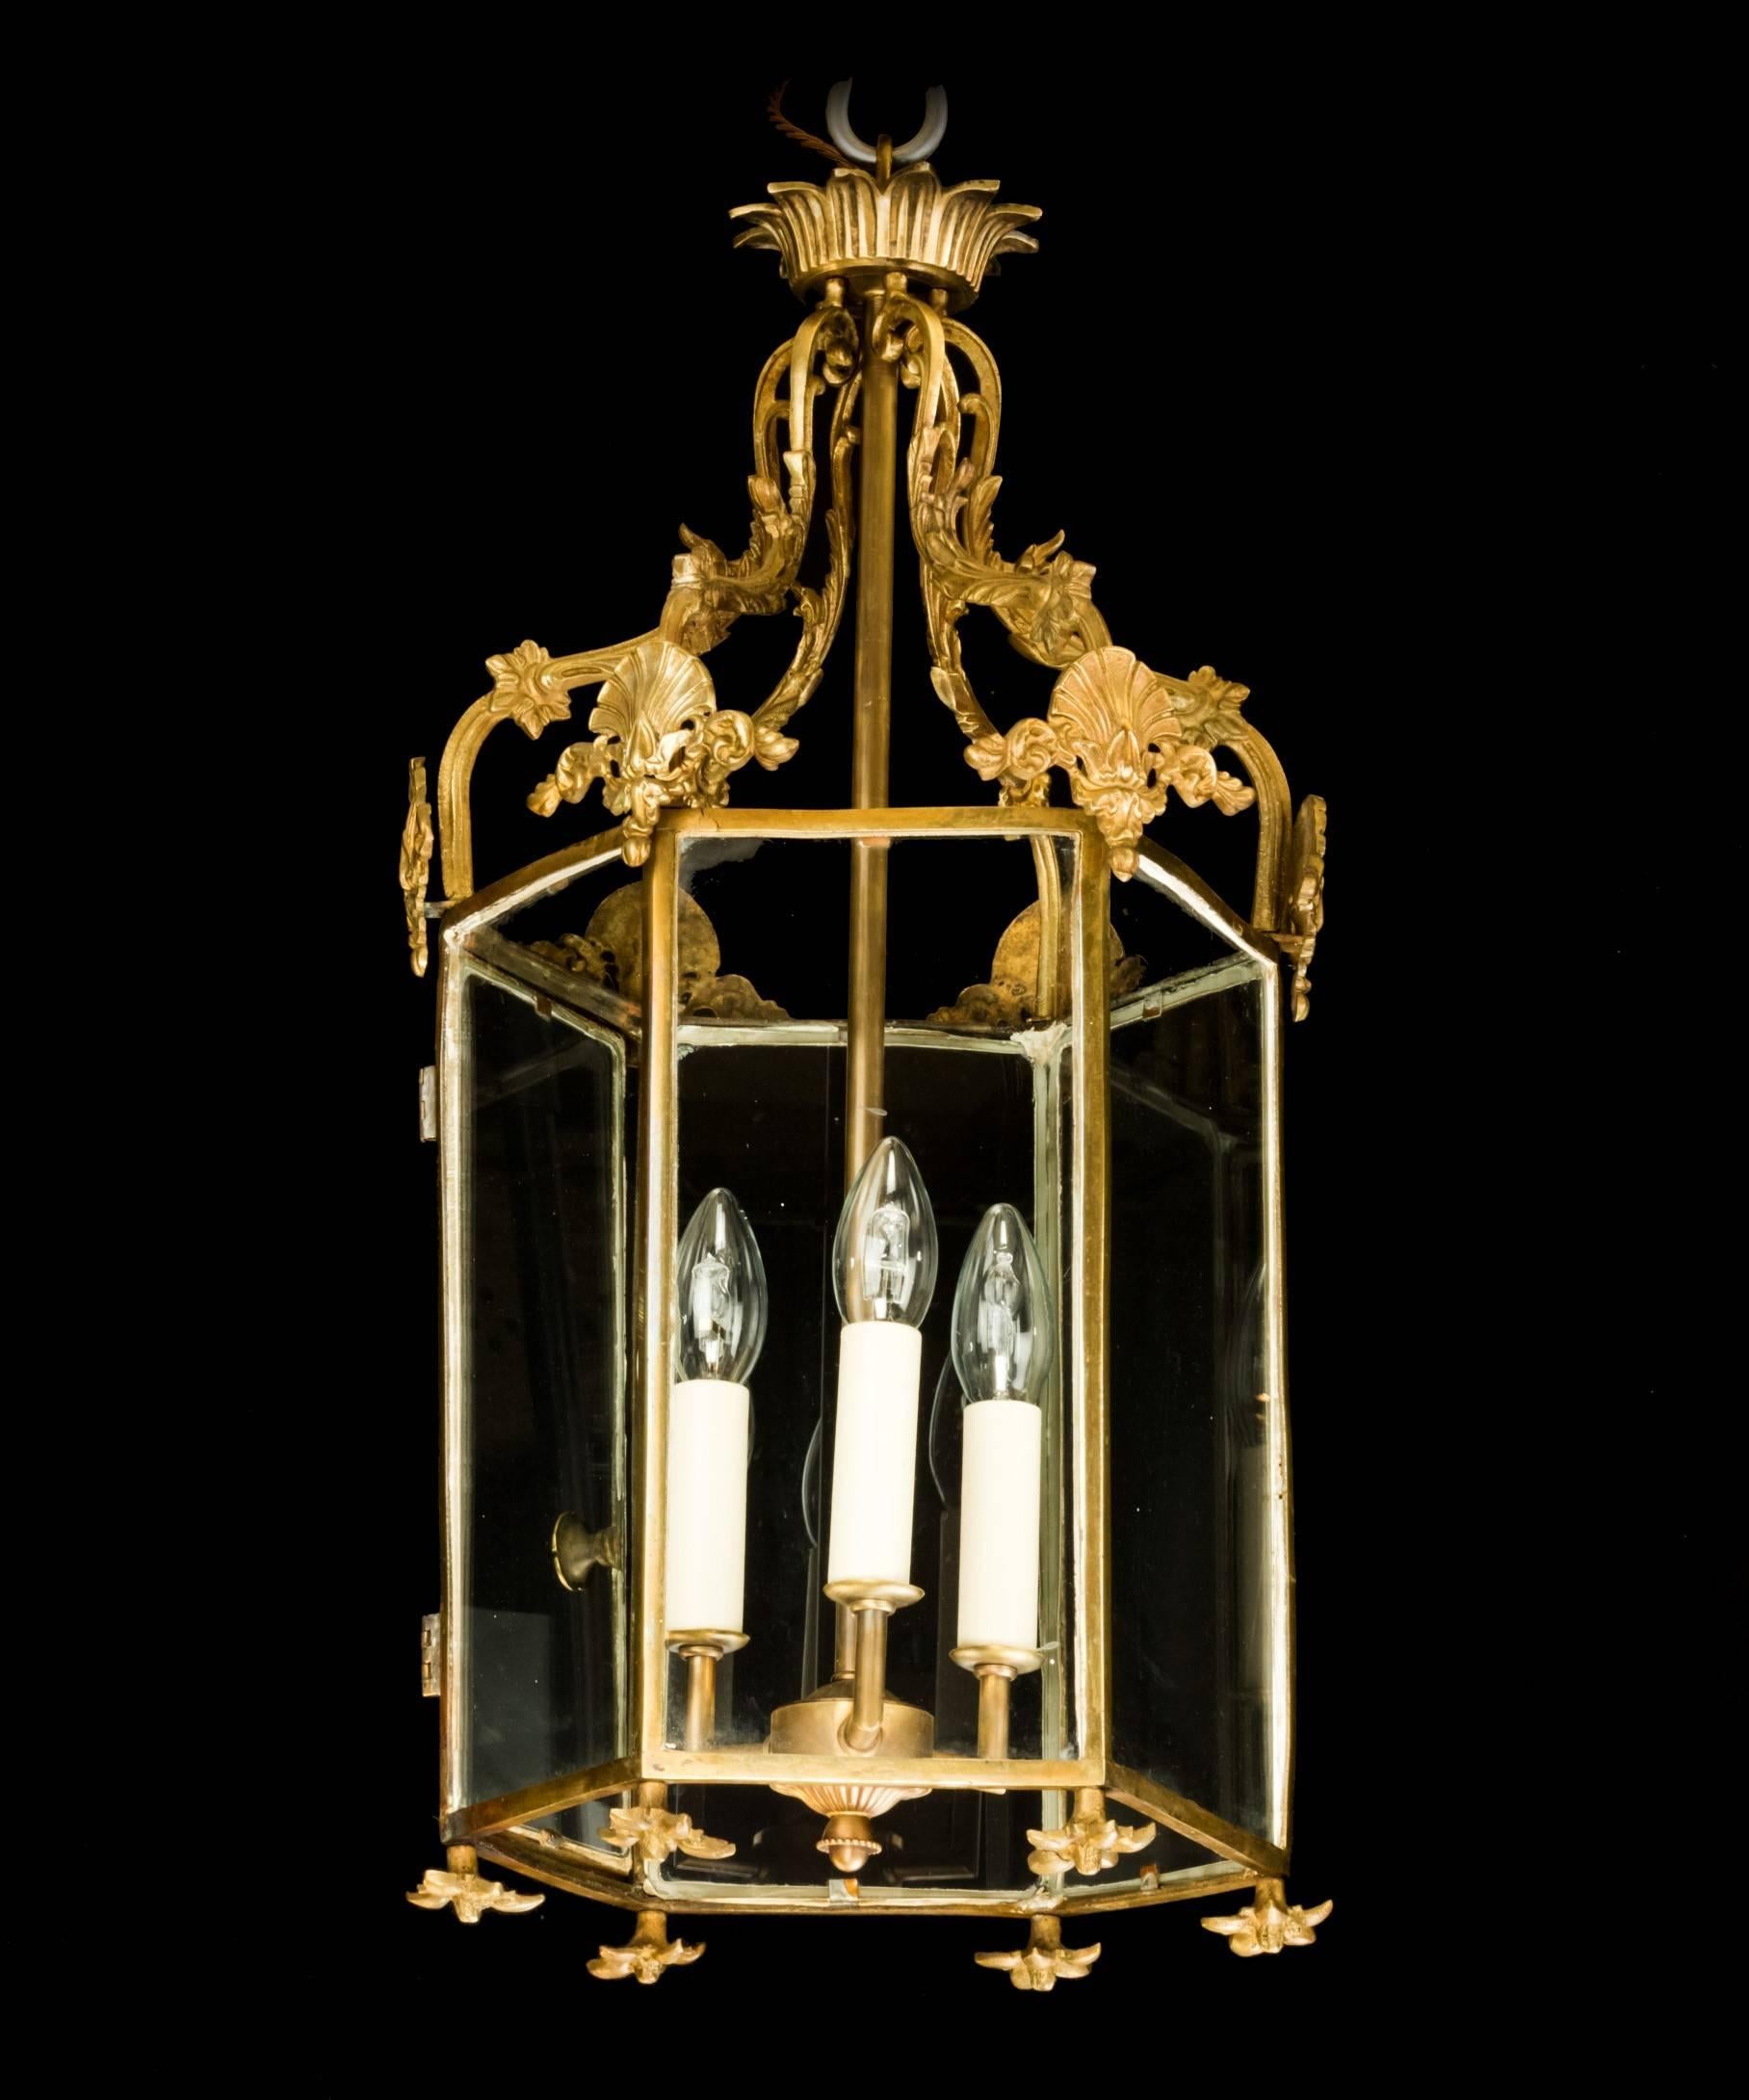 A Georgian style brass hanging lantern in the neoclassical taste; the lantern's hexagonal frame with a crown composed of scrolling acanthus leaves with anthemion’s to the corners of the frame. The lantern's three-light central pendant is modern.